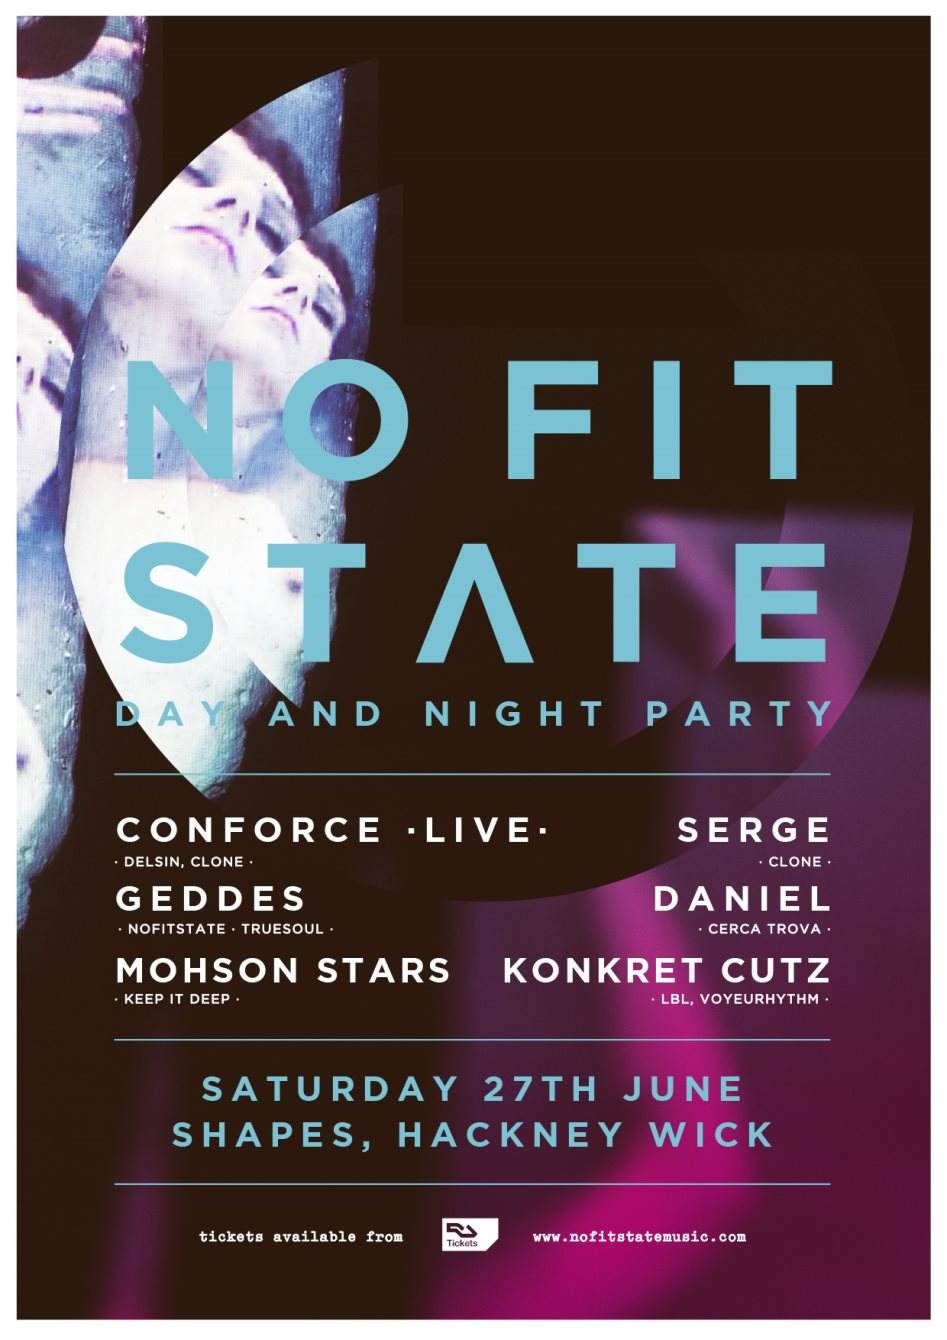 Nofitstate Day & Night Party with Conforce (Live), Serge, Geddes, Daniel & More - Página frontal